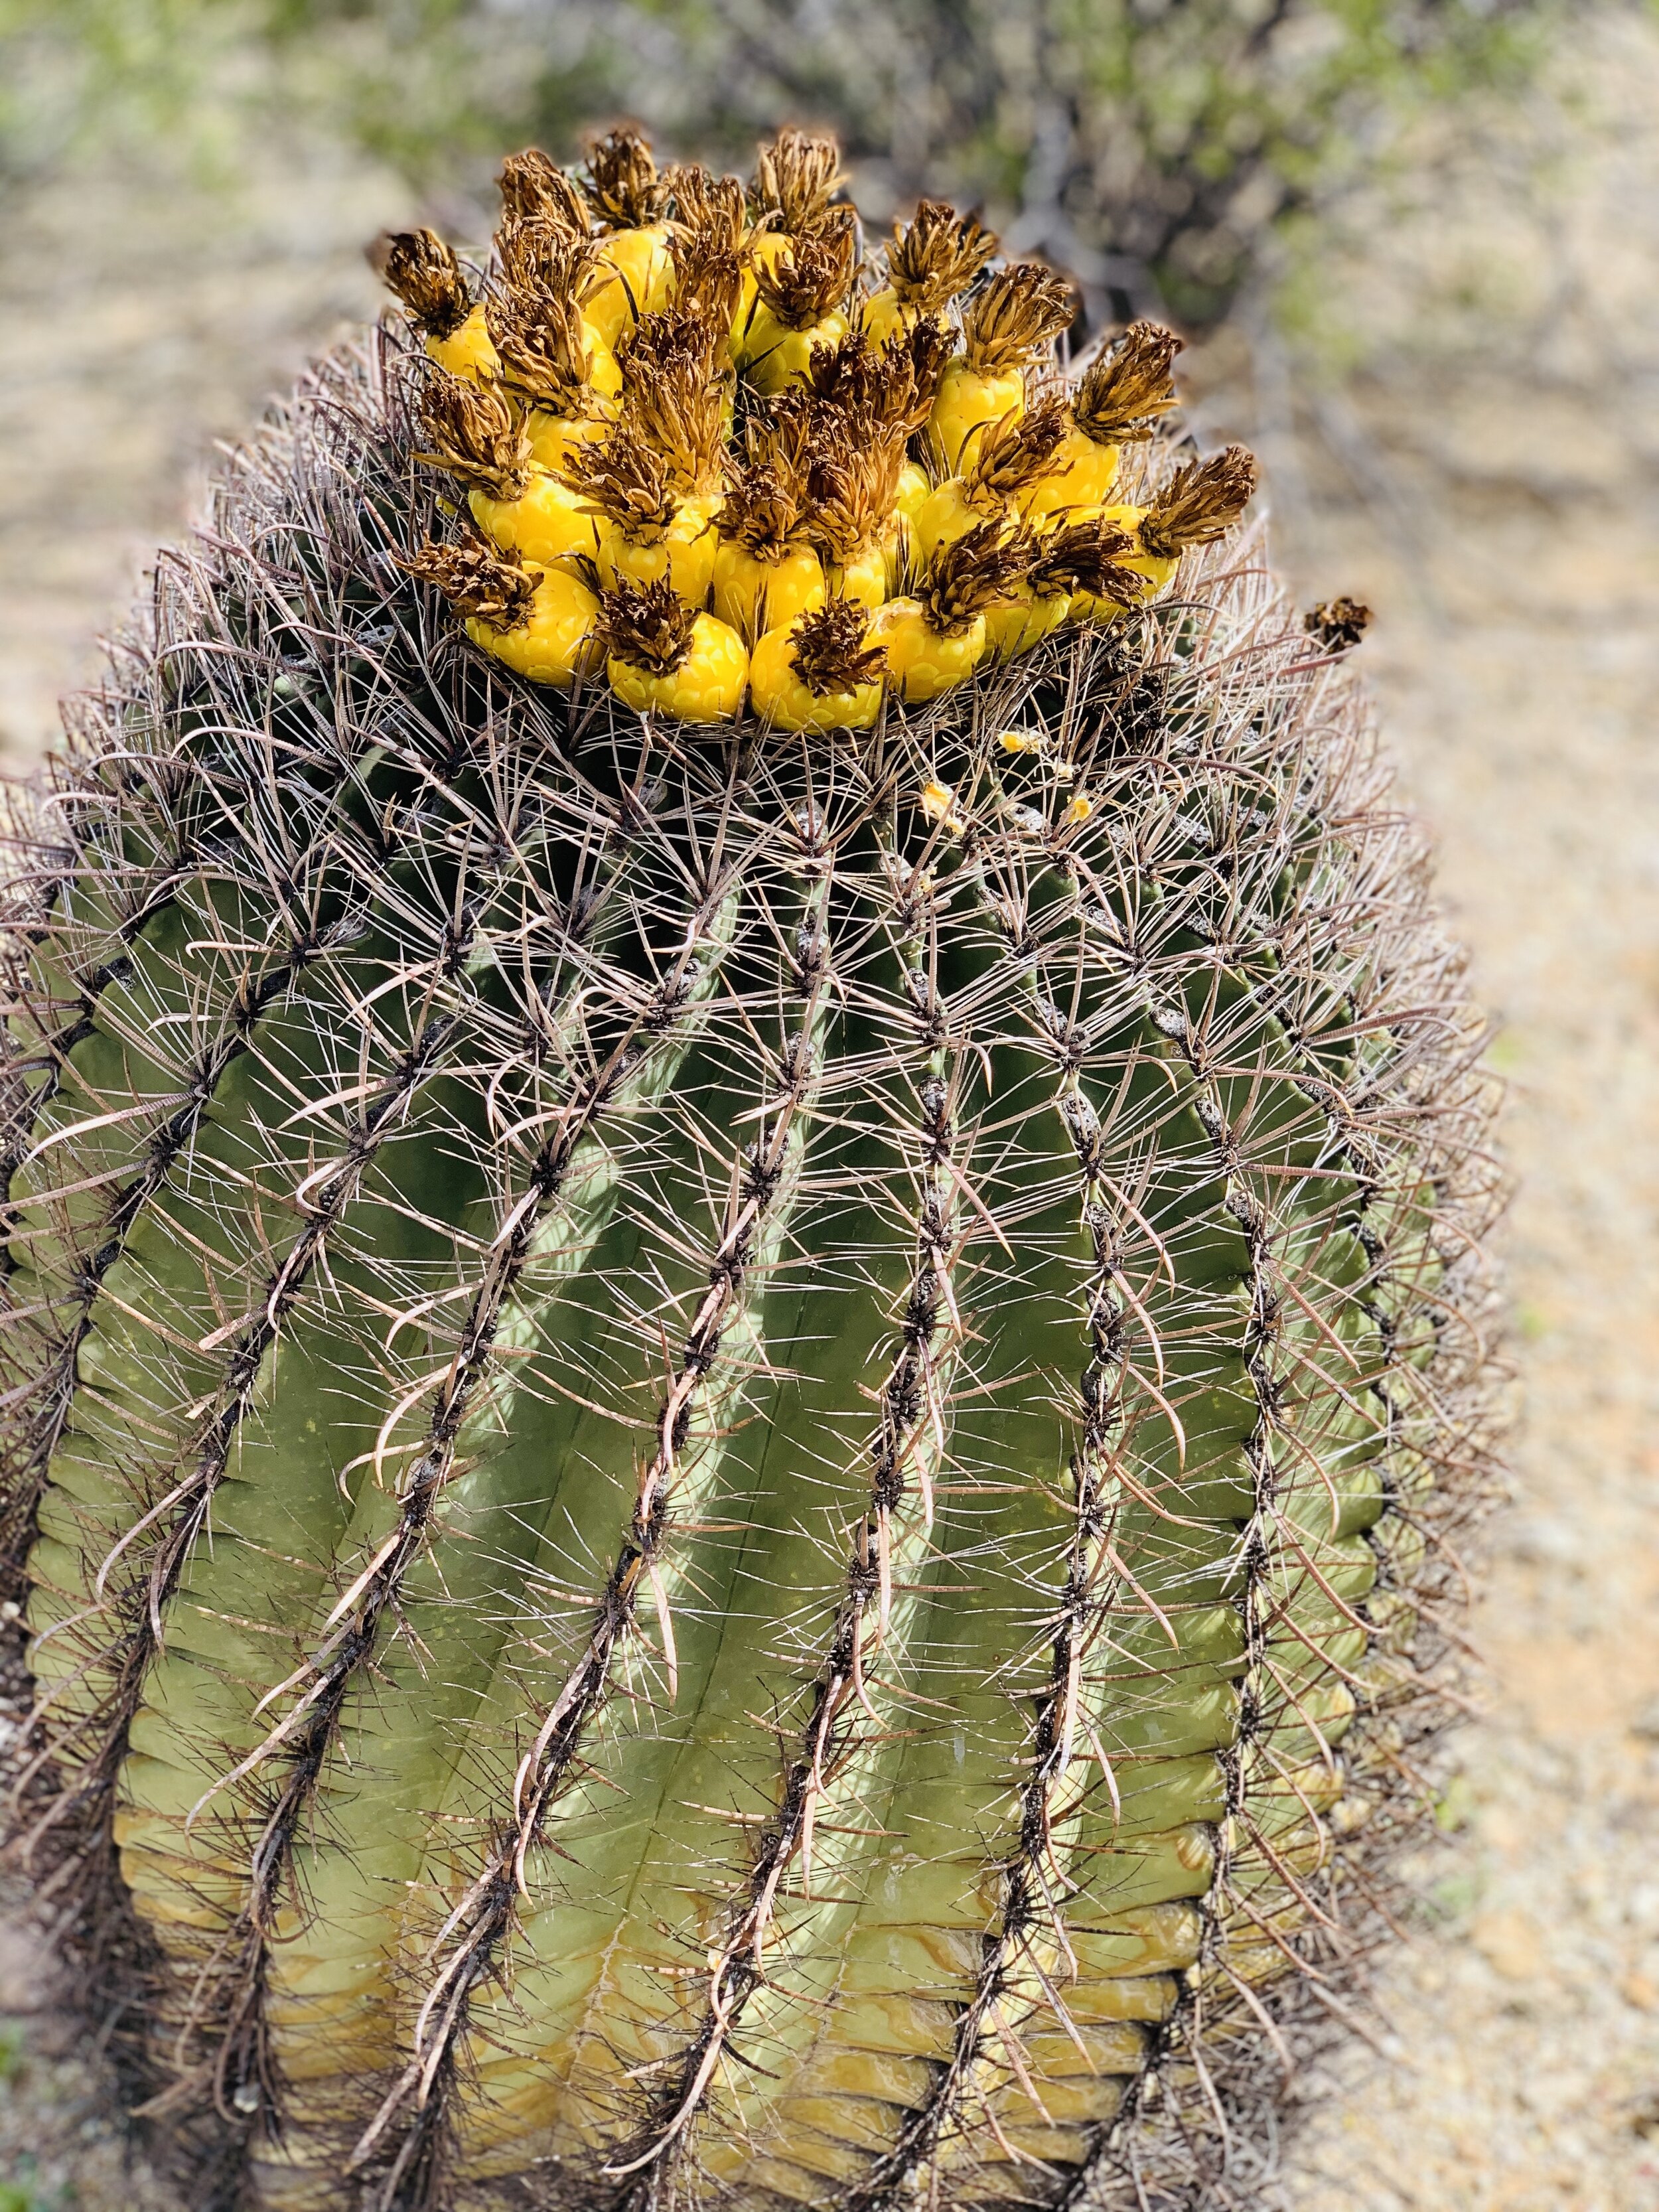  Glenda read these yellow “things” on the top of the barrel cactus were edible, and just had to try one. I was not as adventurous. 